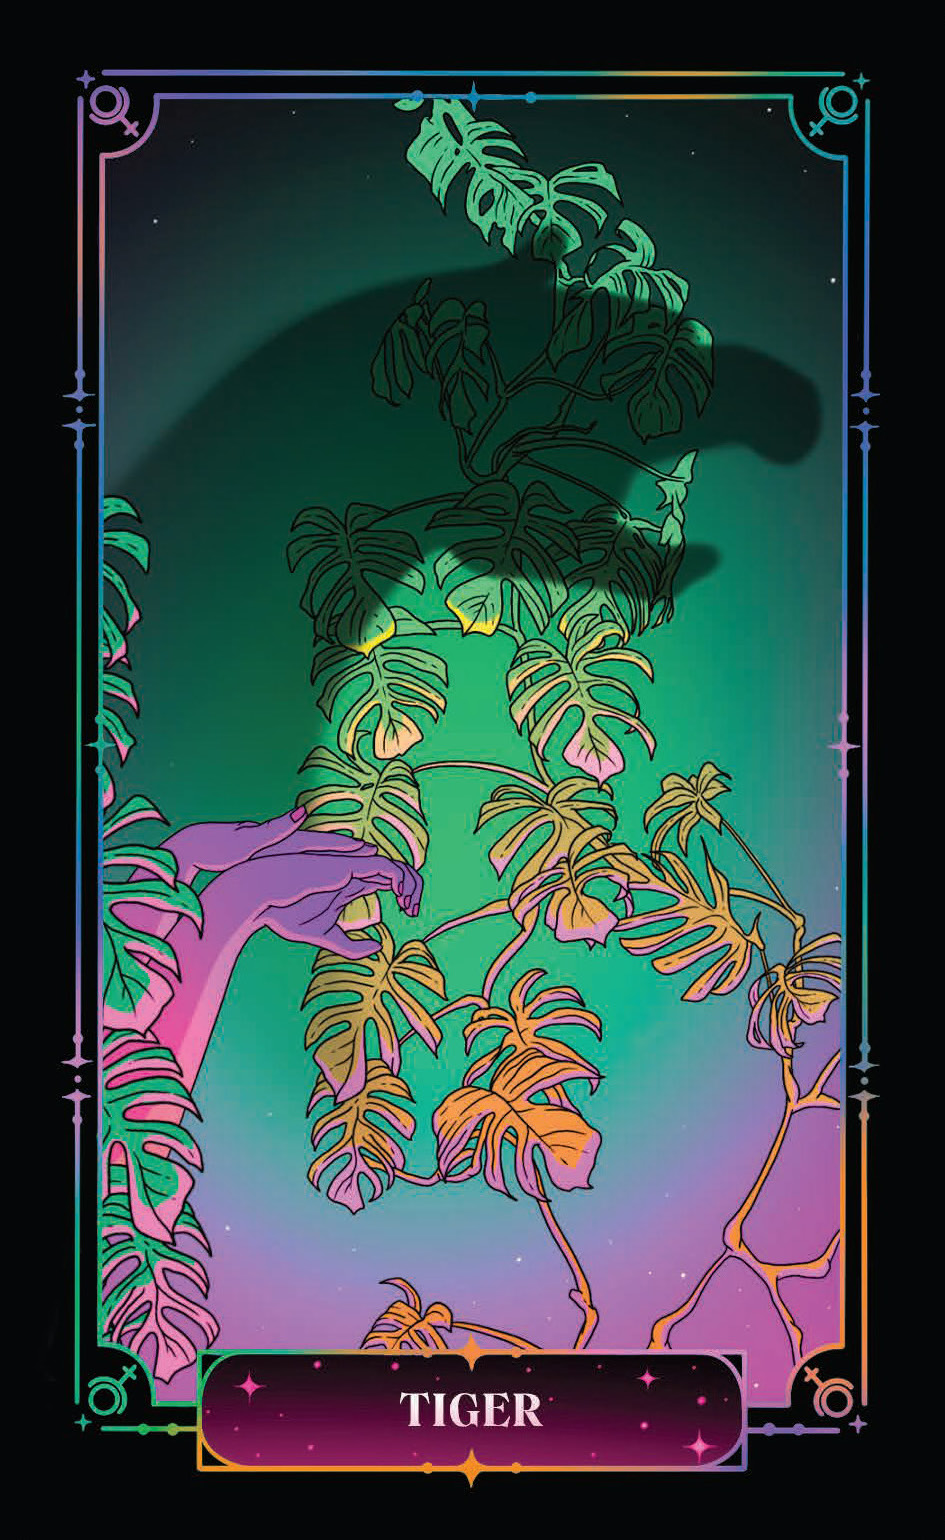 Image of the Tiger card from the Oracle of Pluto deck